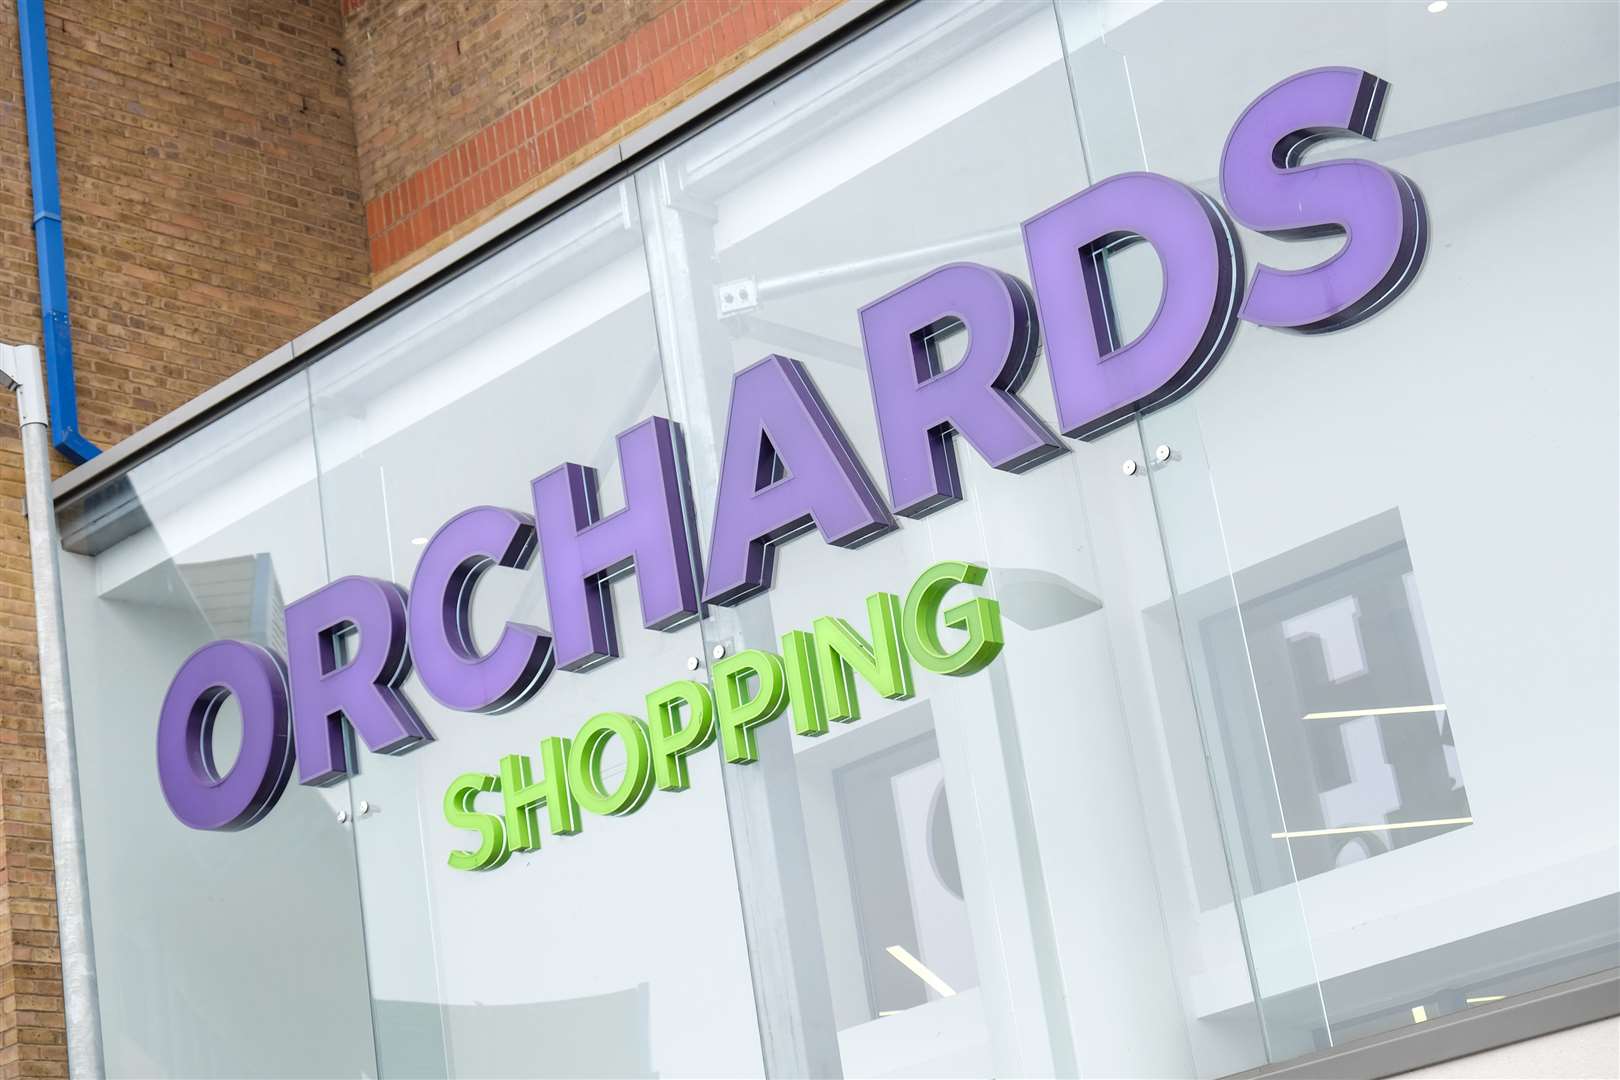 Orchards Shopping Centre is covered by the scheme. Picture: Matthew Walker